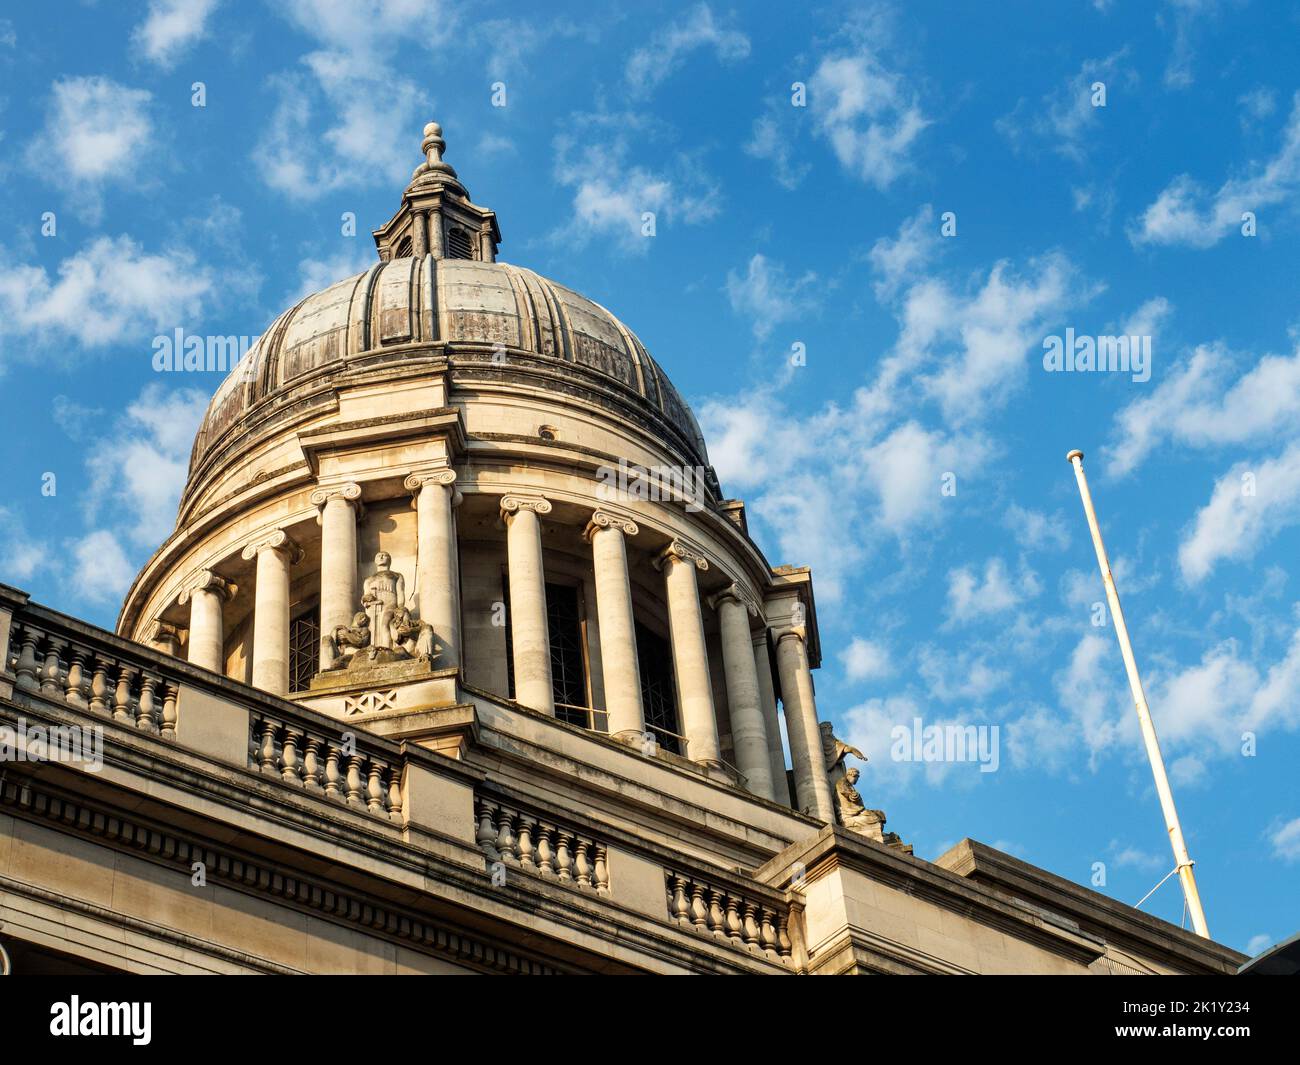 Dome of Nottingham Council House from Long Row against blue sky with dappled clouds Nottingham Nottinghamshire England Stock Photo